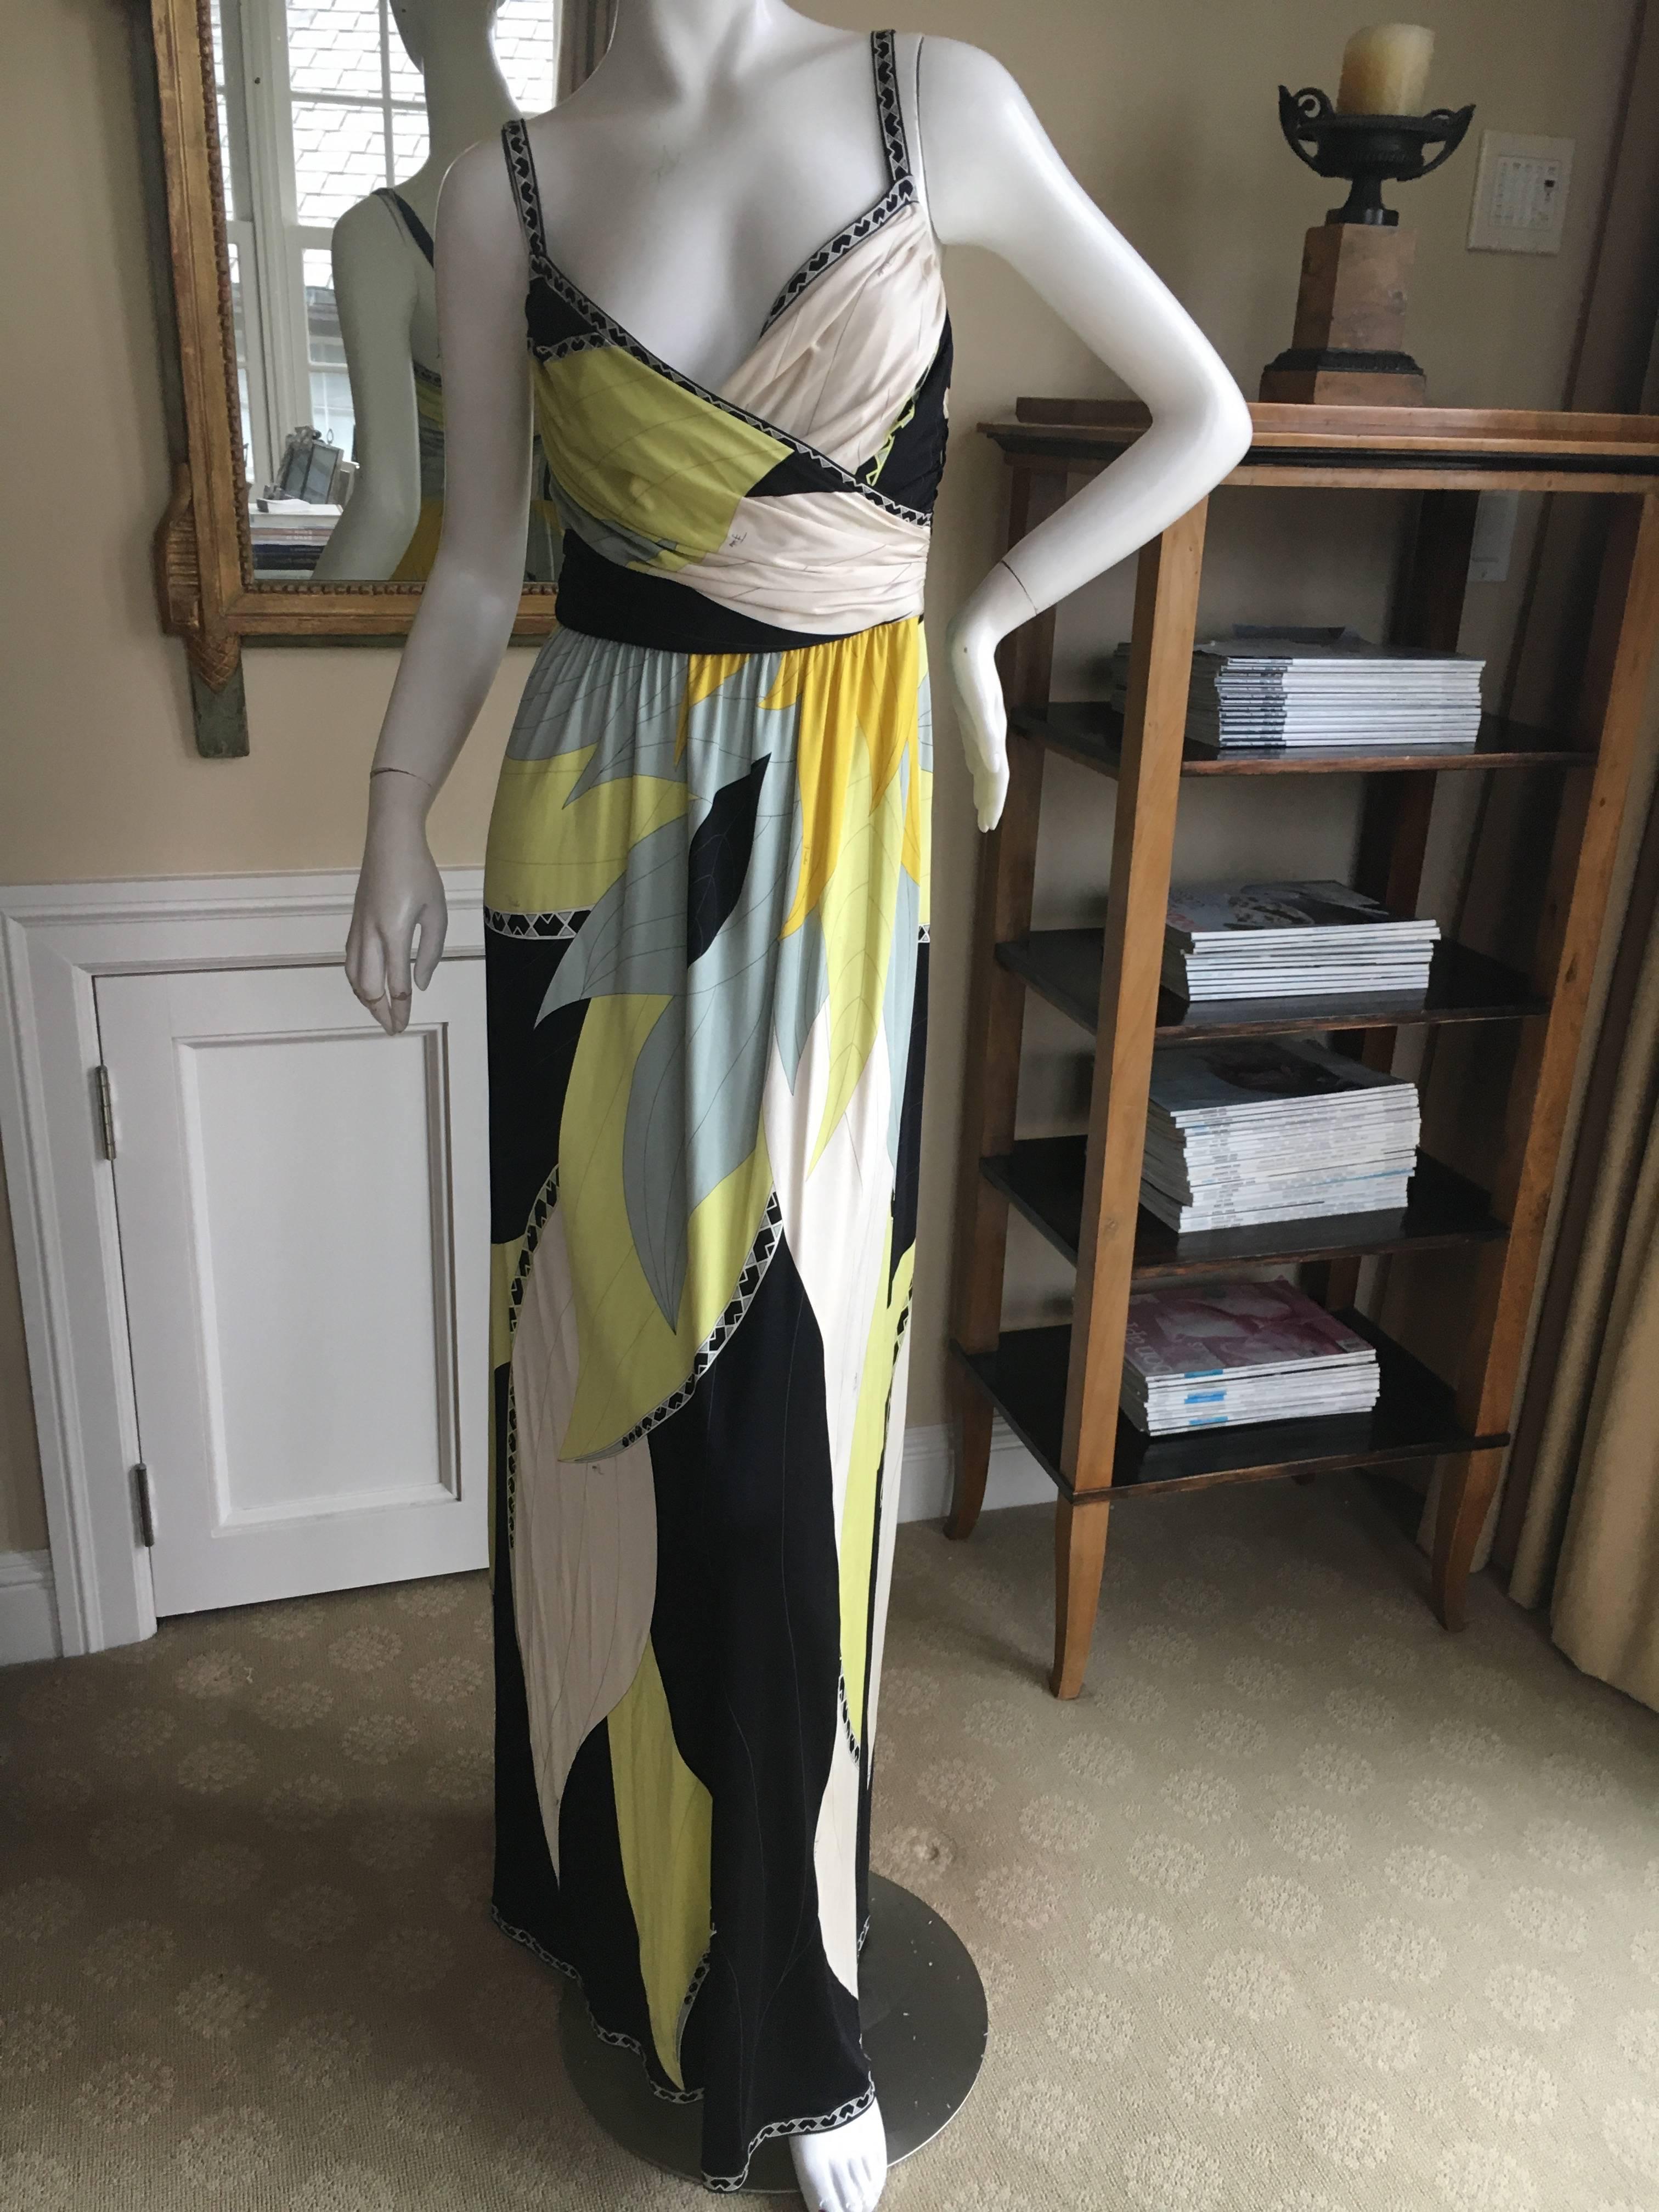 Beautiful silk evening dress from Emilio Pucci.
It is New with tags size 36
Bust 36